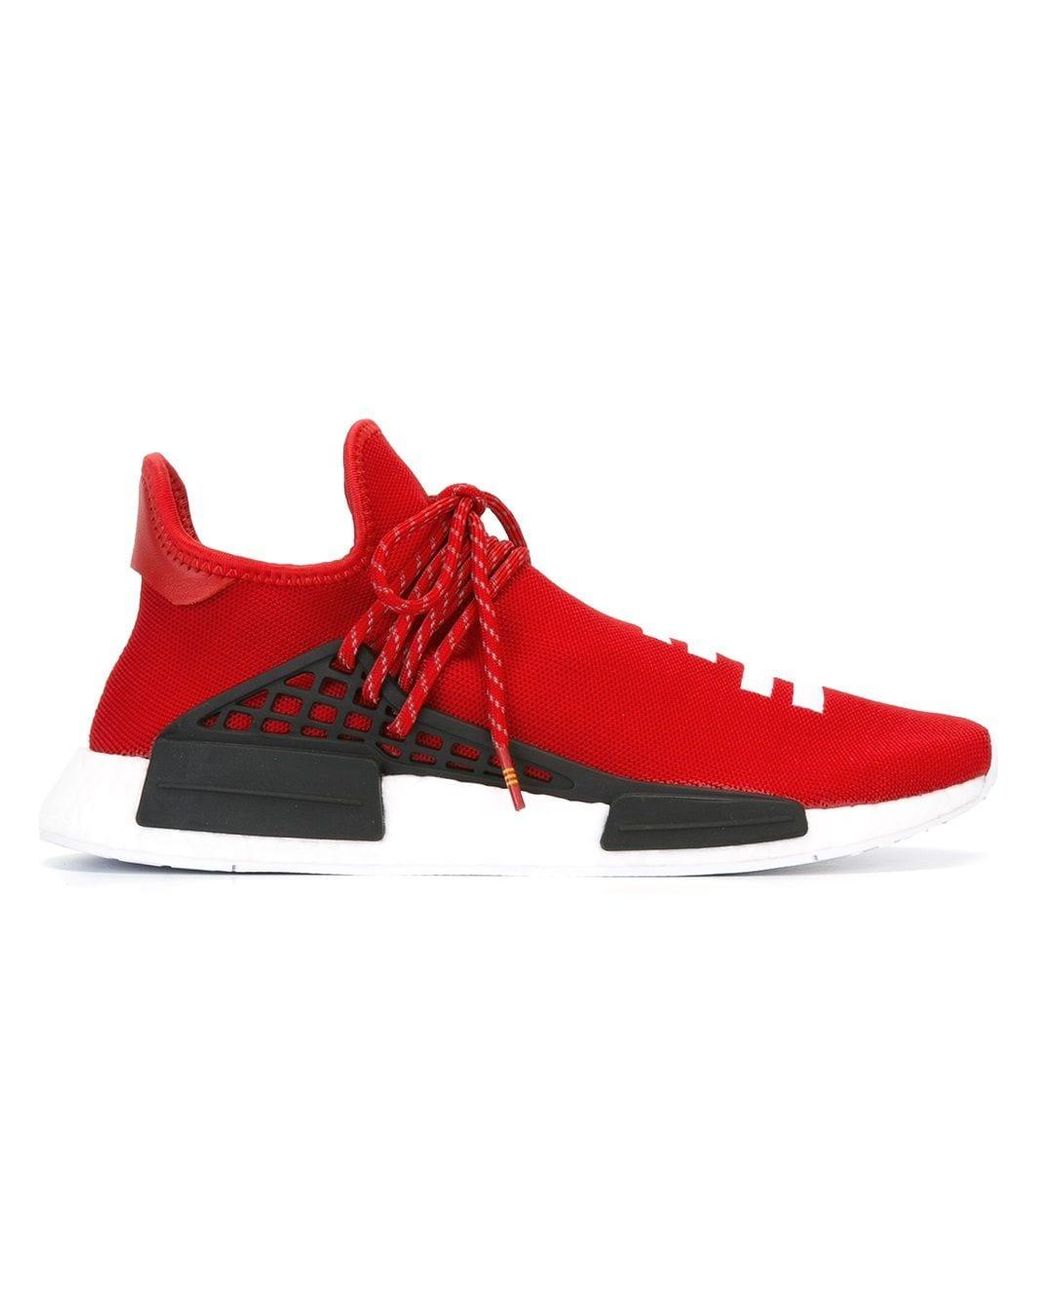 adidas Rubber Pharrell X Hu Nmd Red Human Race Sneakers for Men - Save 38%  | Lyst